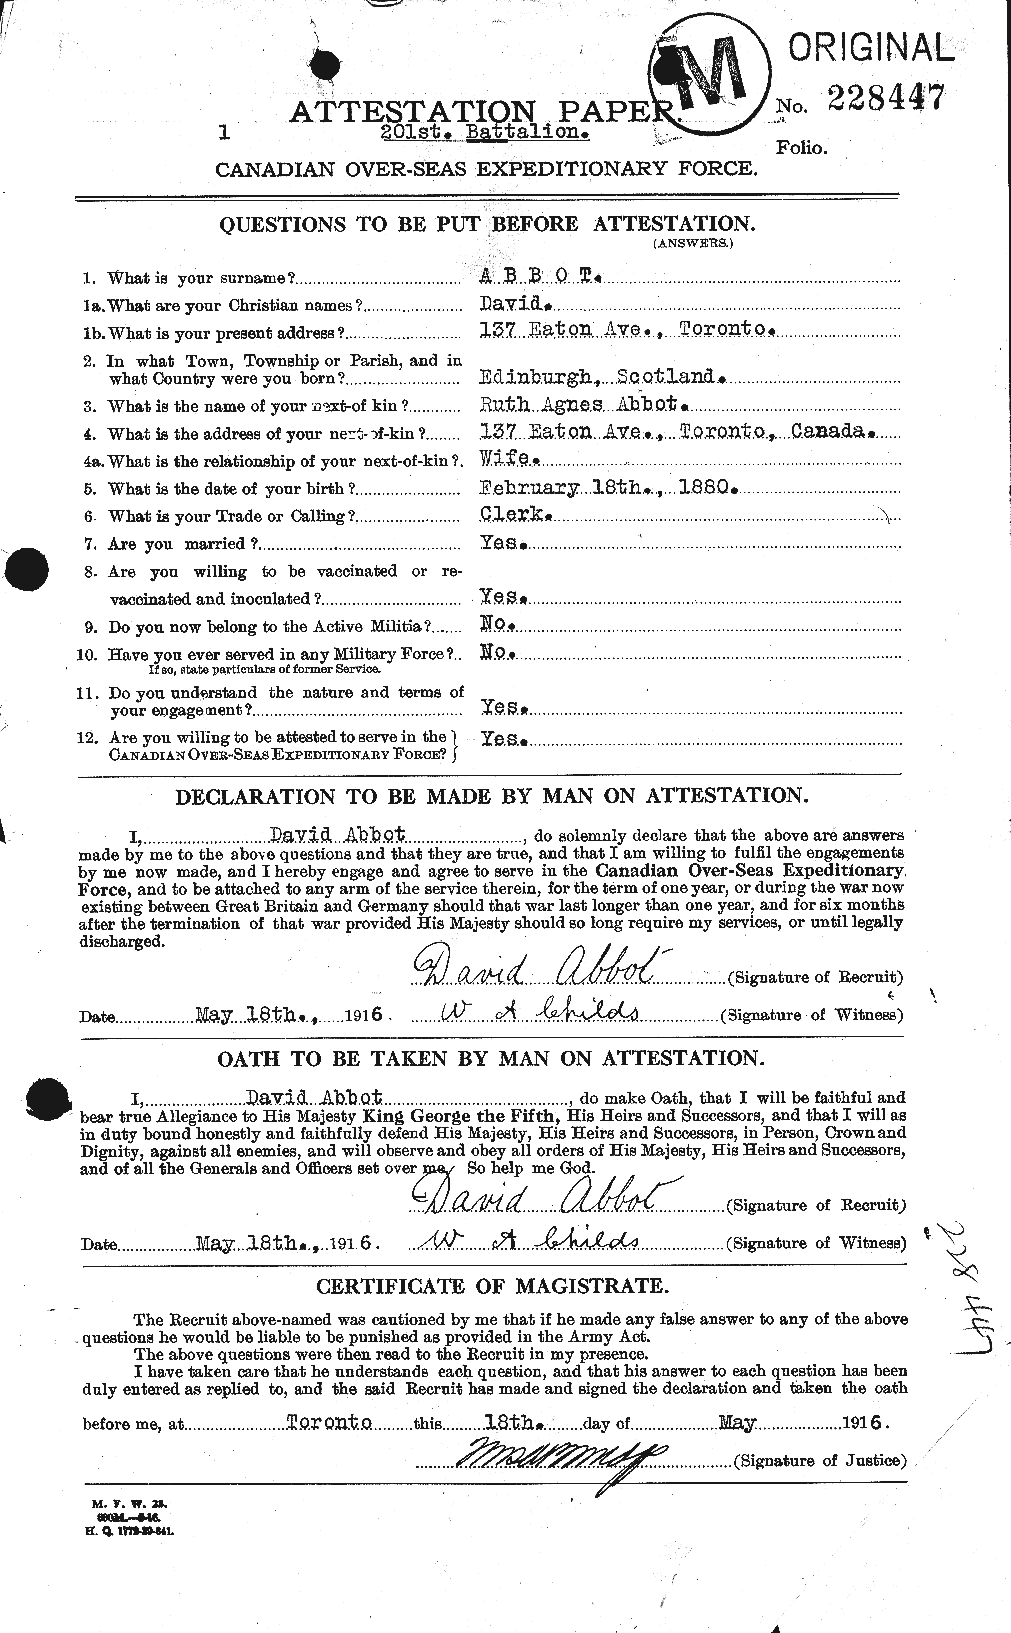 Personnel Records of the First World War - CEF 200797a